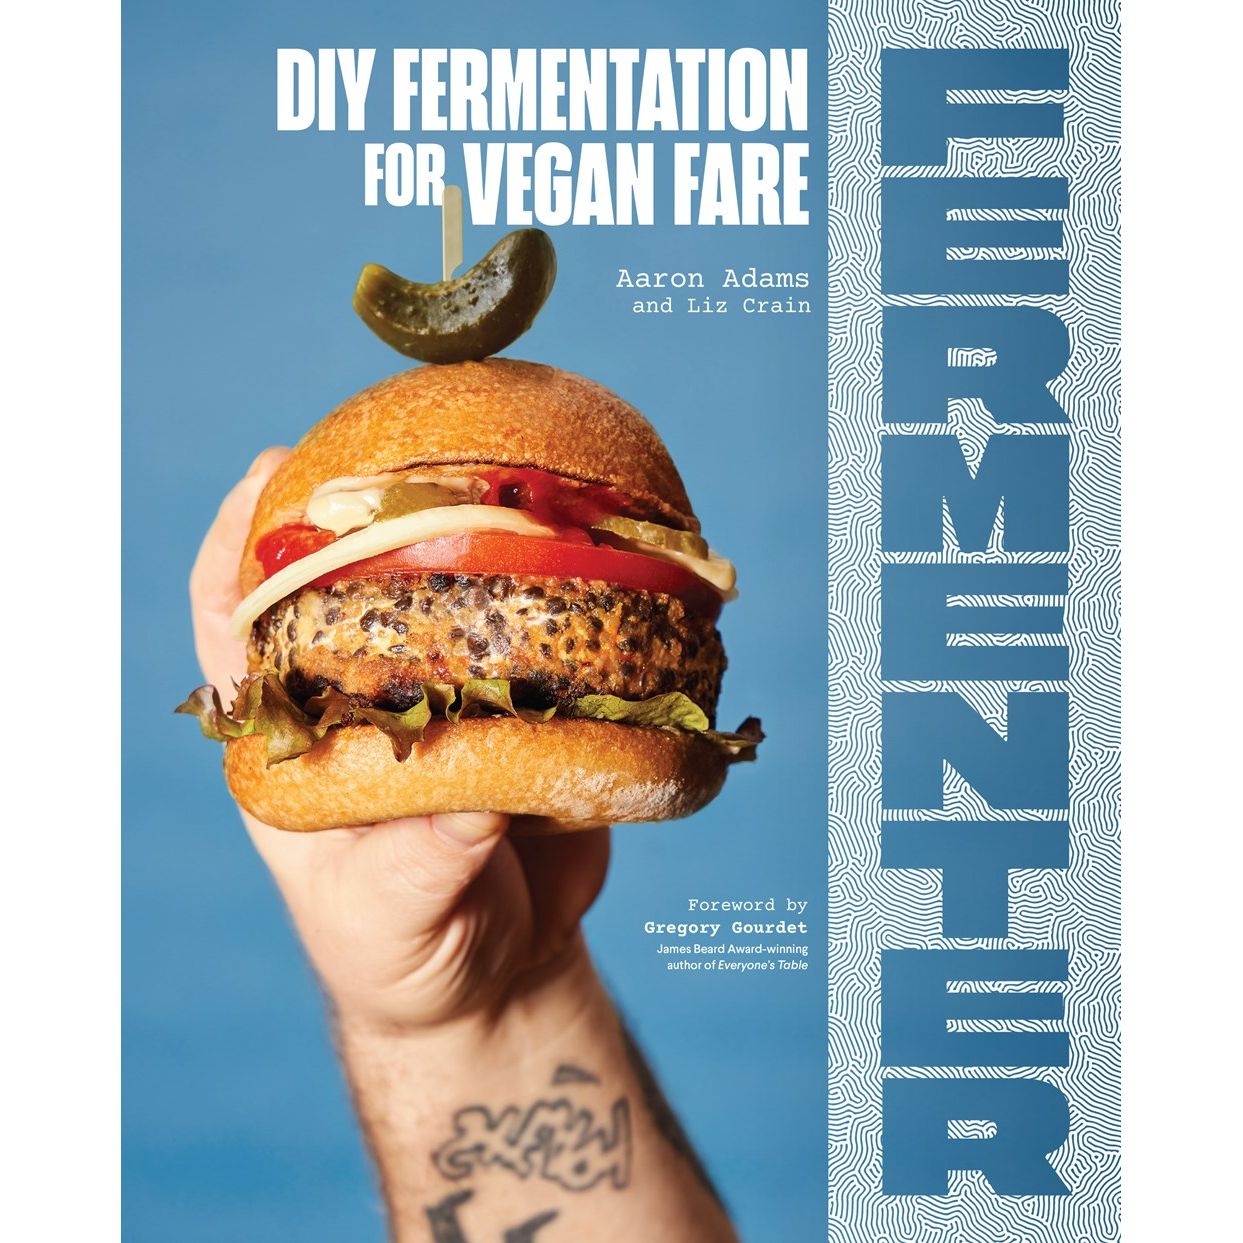 Fermenter : DIY Fermentation for Vegan Fare, Including Recipes for Krauts, Pickles, Koji, Tempeh, Nut- & Seed-Based Cheeses, Fermented Beverages & What to Do with Them (Aaron Adams, Liz Crain, with a foreward by Gregory Gourdet